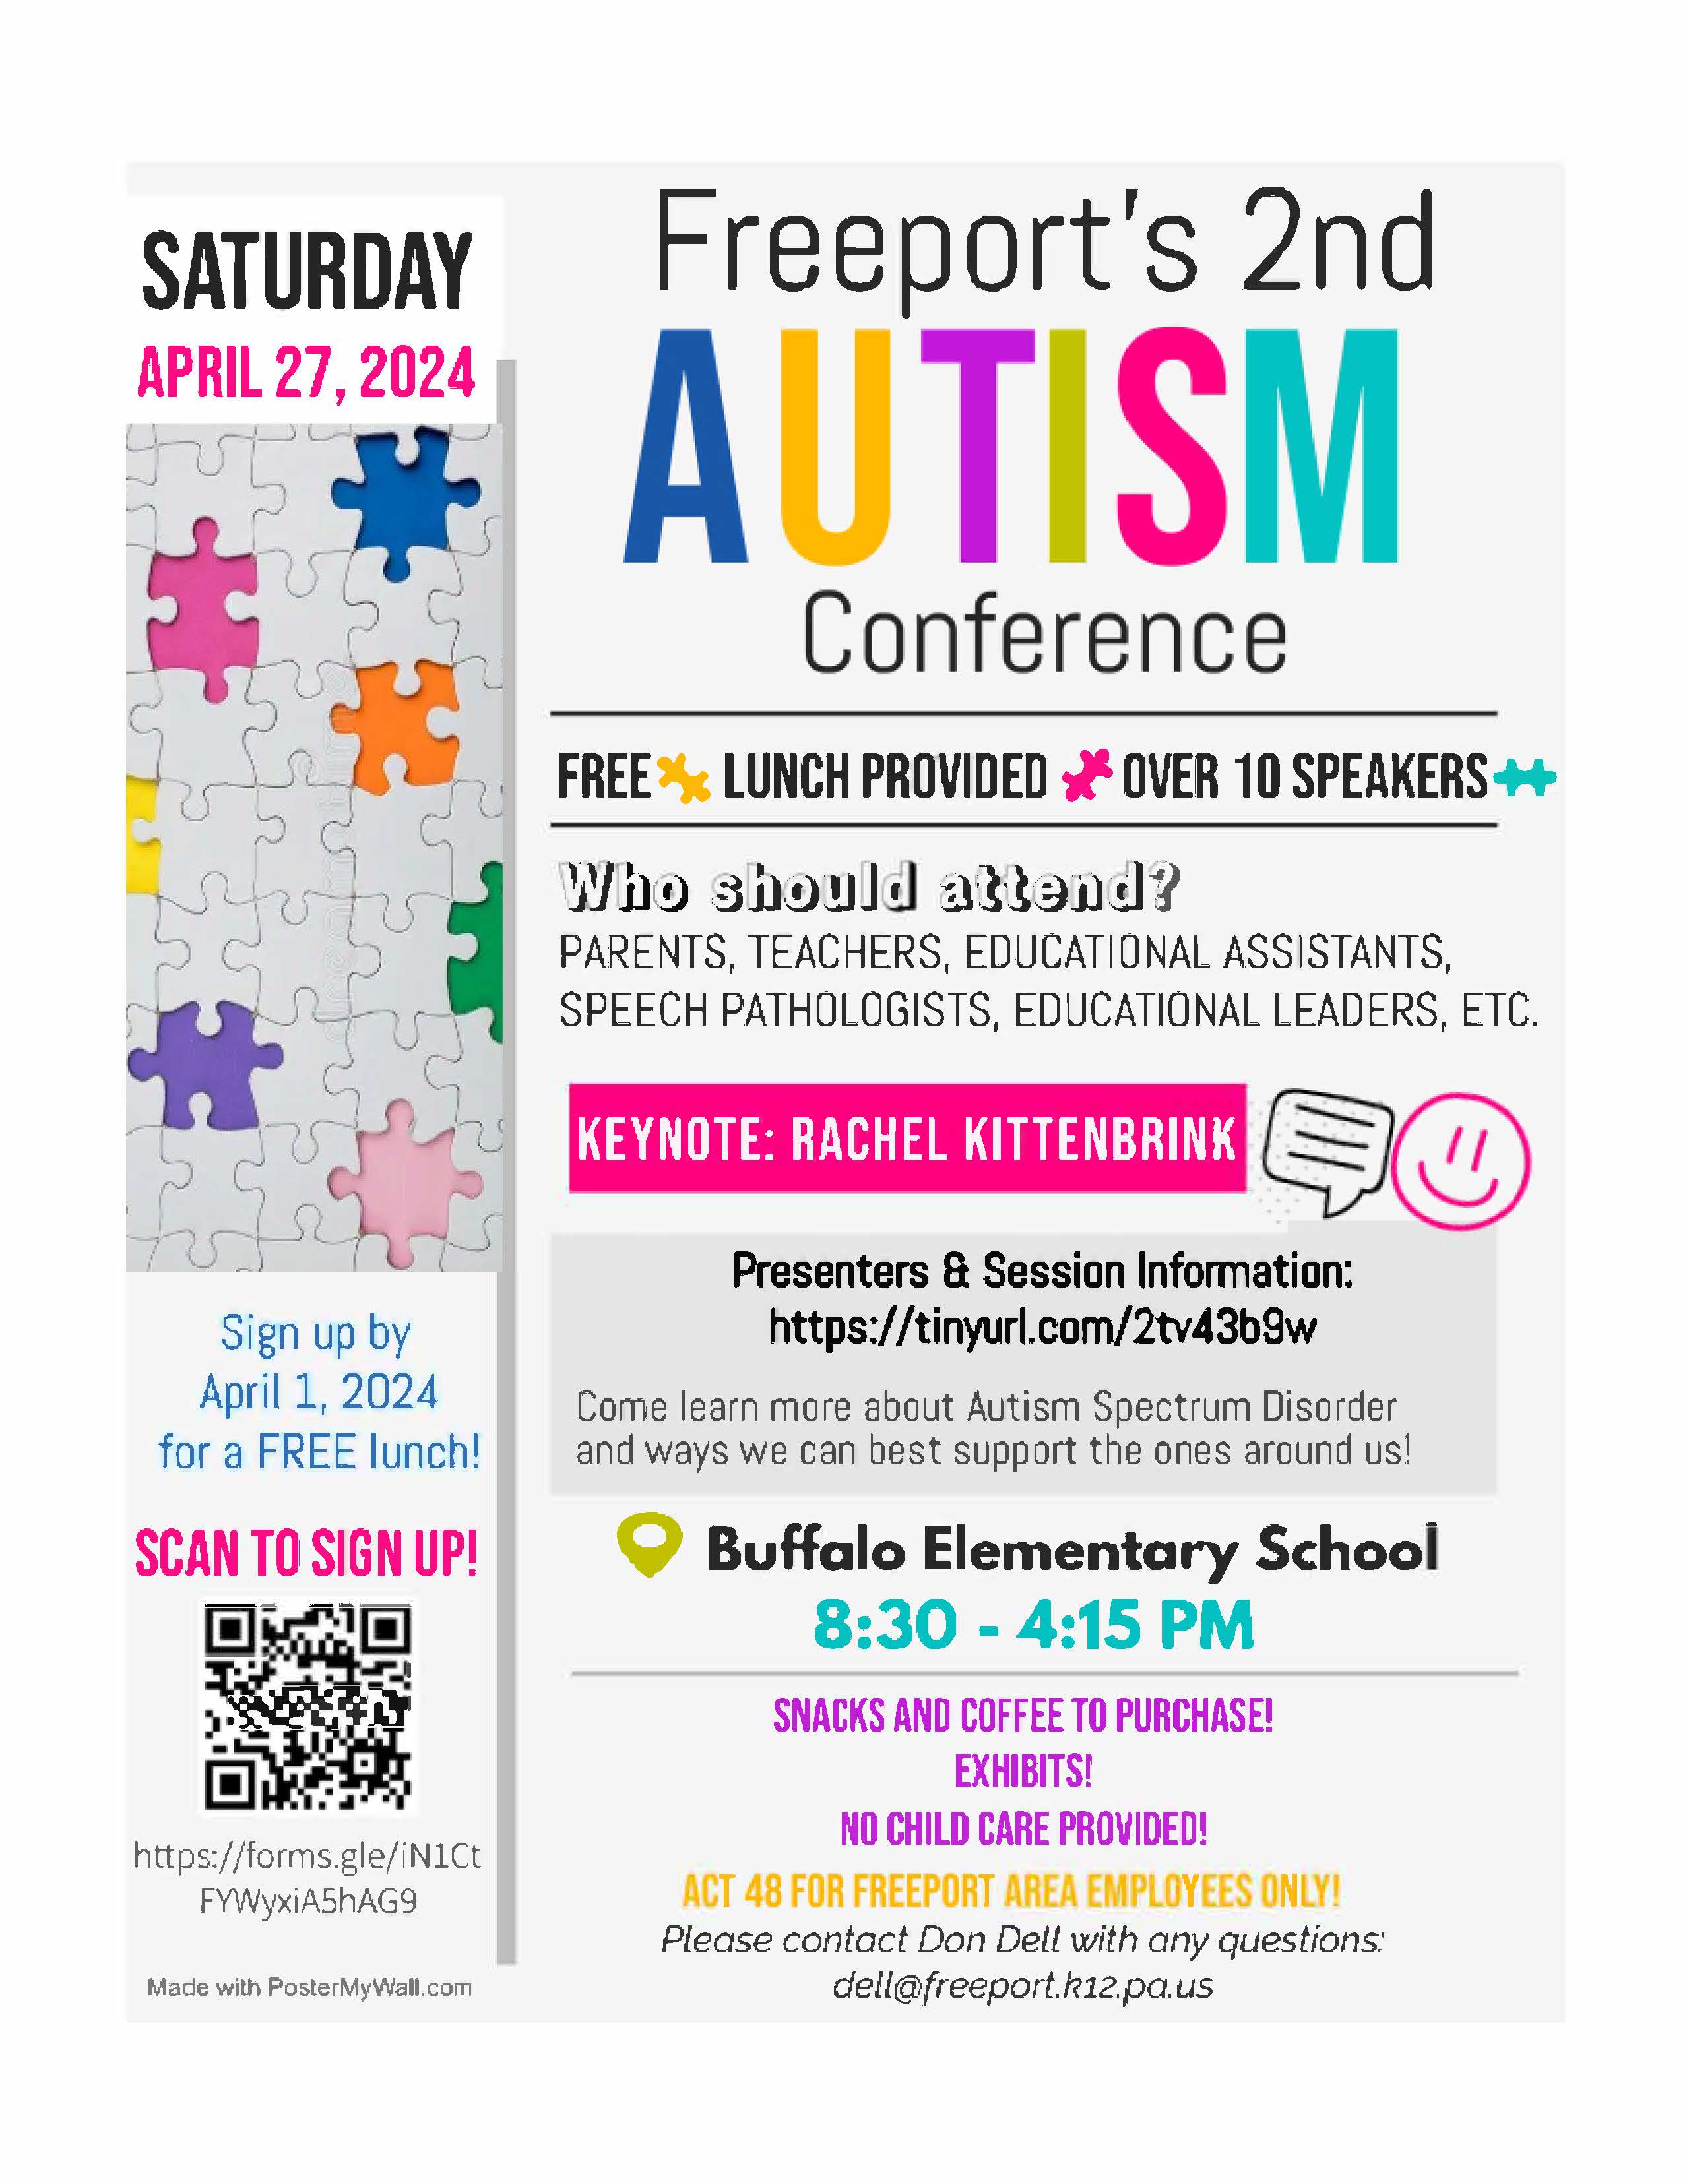 Freeport's 2nd Autism Conference Flyer
